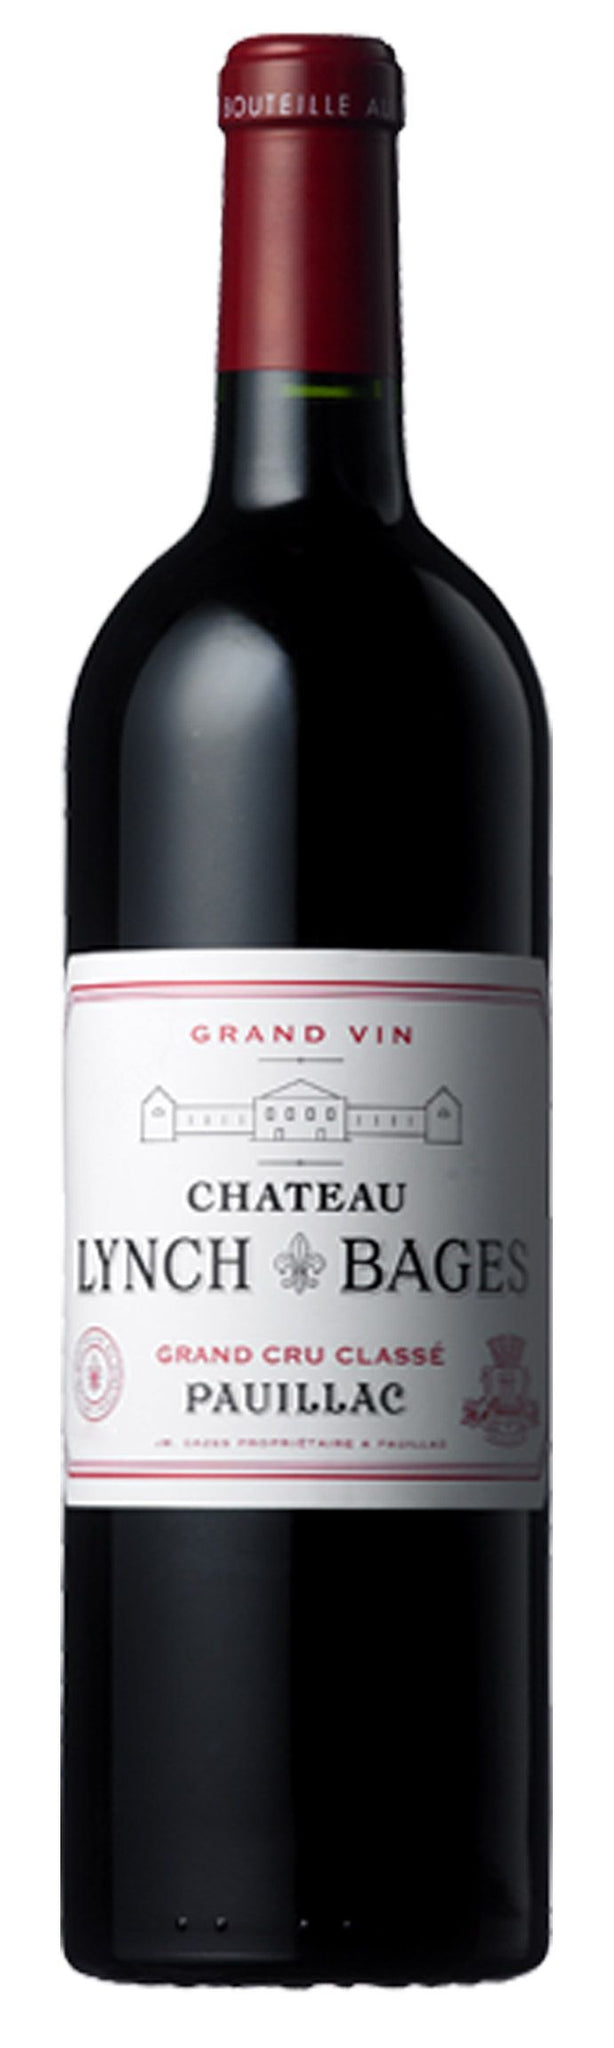 2012 Chateau Lynch Bages – homedeliverywine.com